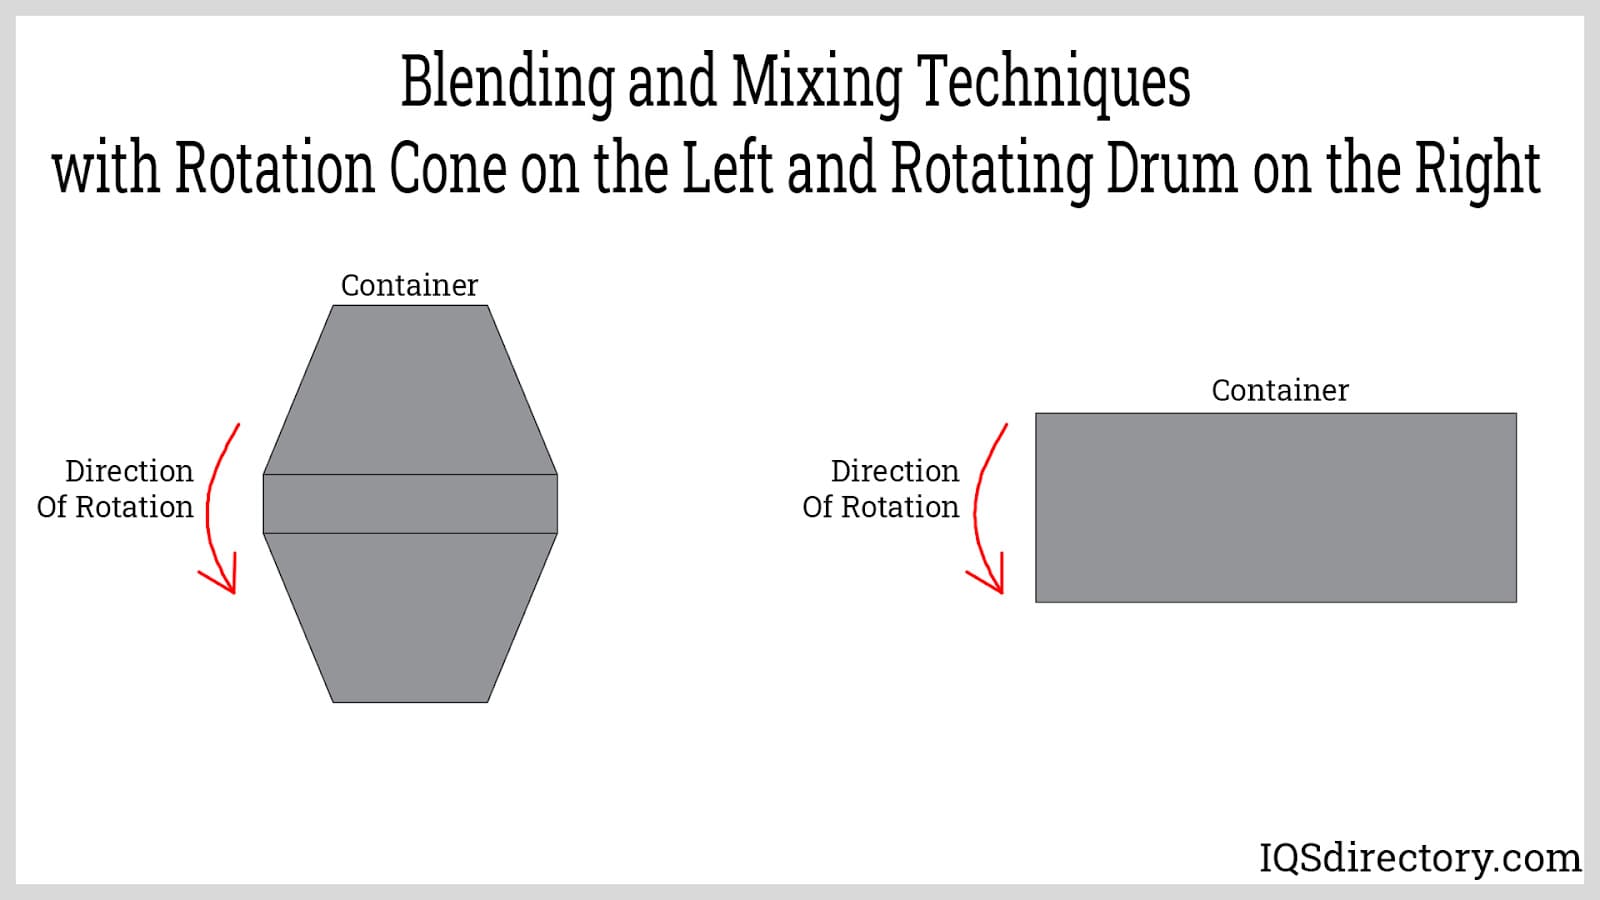 Blending and Mixing Techniques with Rotation Cone on the Left and Rotating Drum on the Right